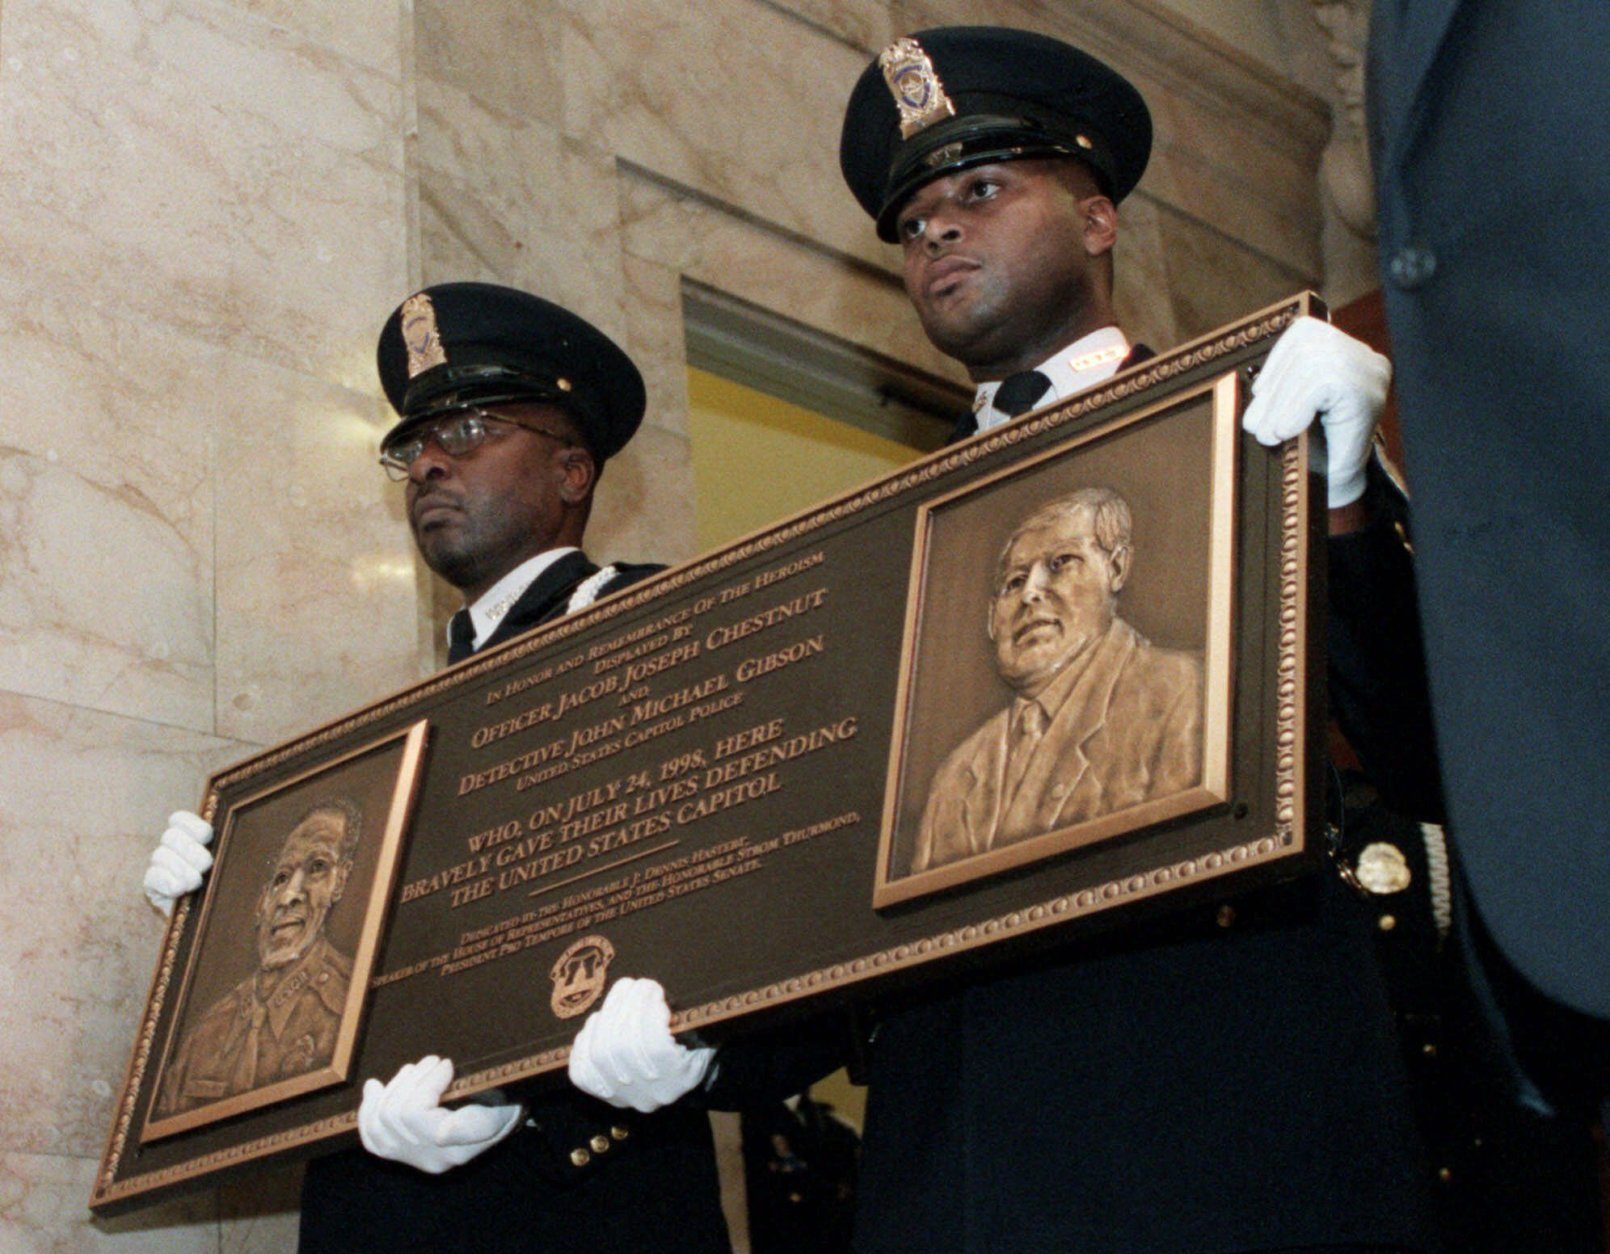 FILE — Capitol Hill officers carry a plaque on Capitol Hill Thursday, July 22, 1999 honoring slain officers Jacob Chestnut and John Gibson. (AP Photo/George Bridges, File)